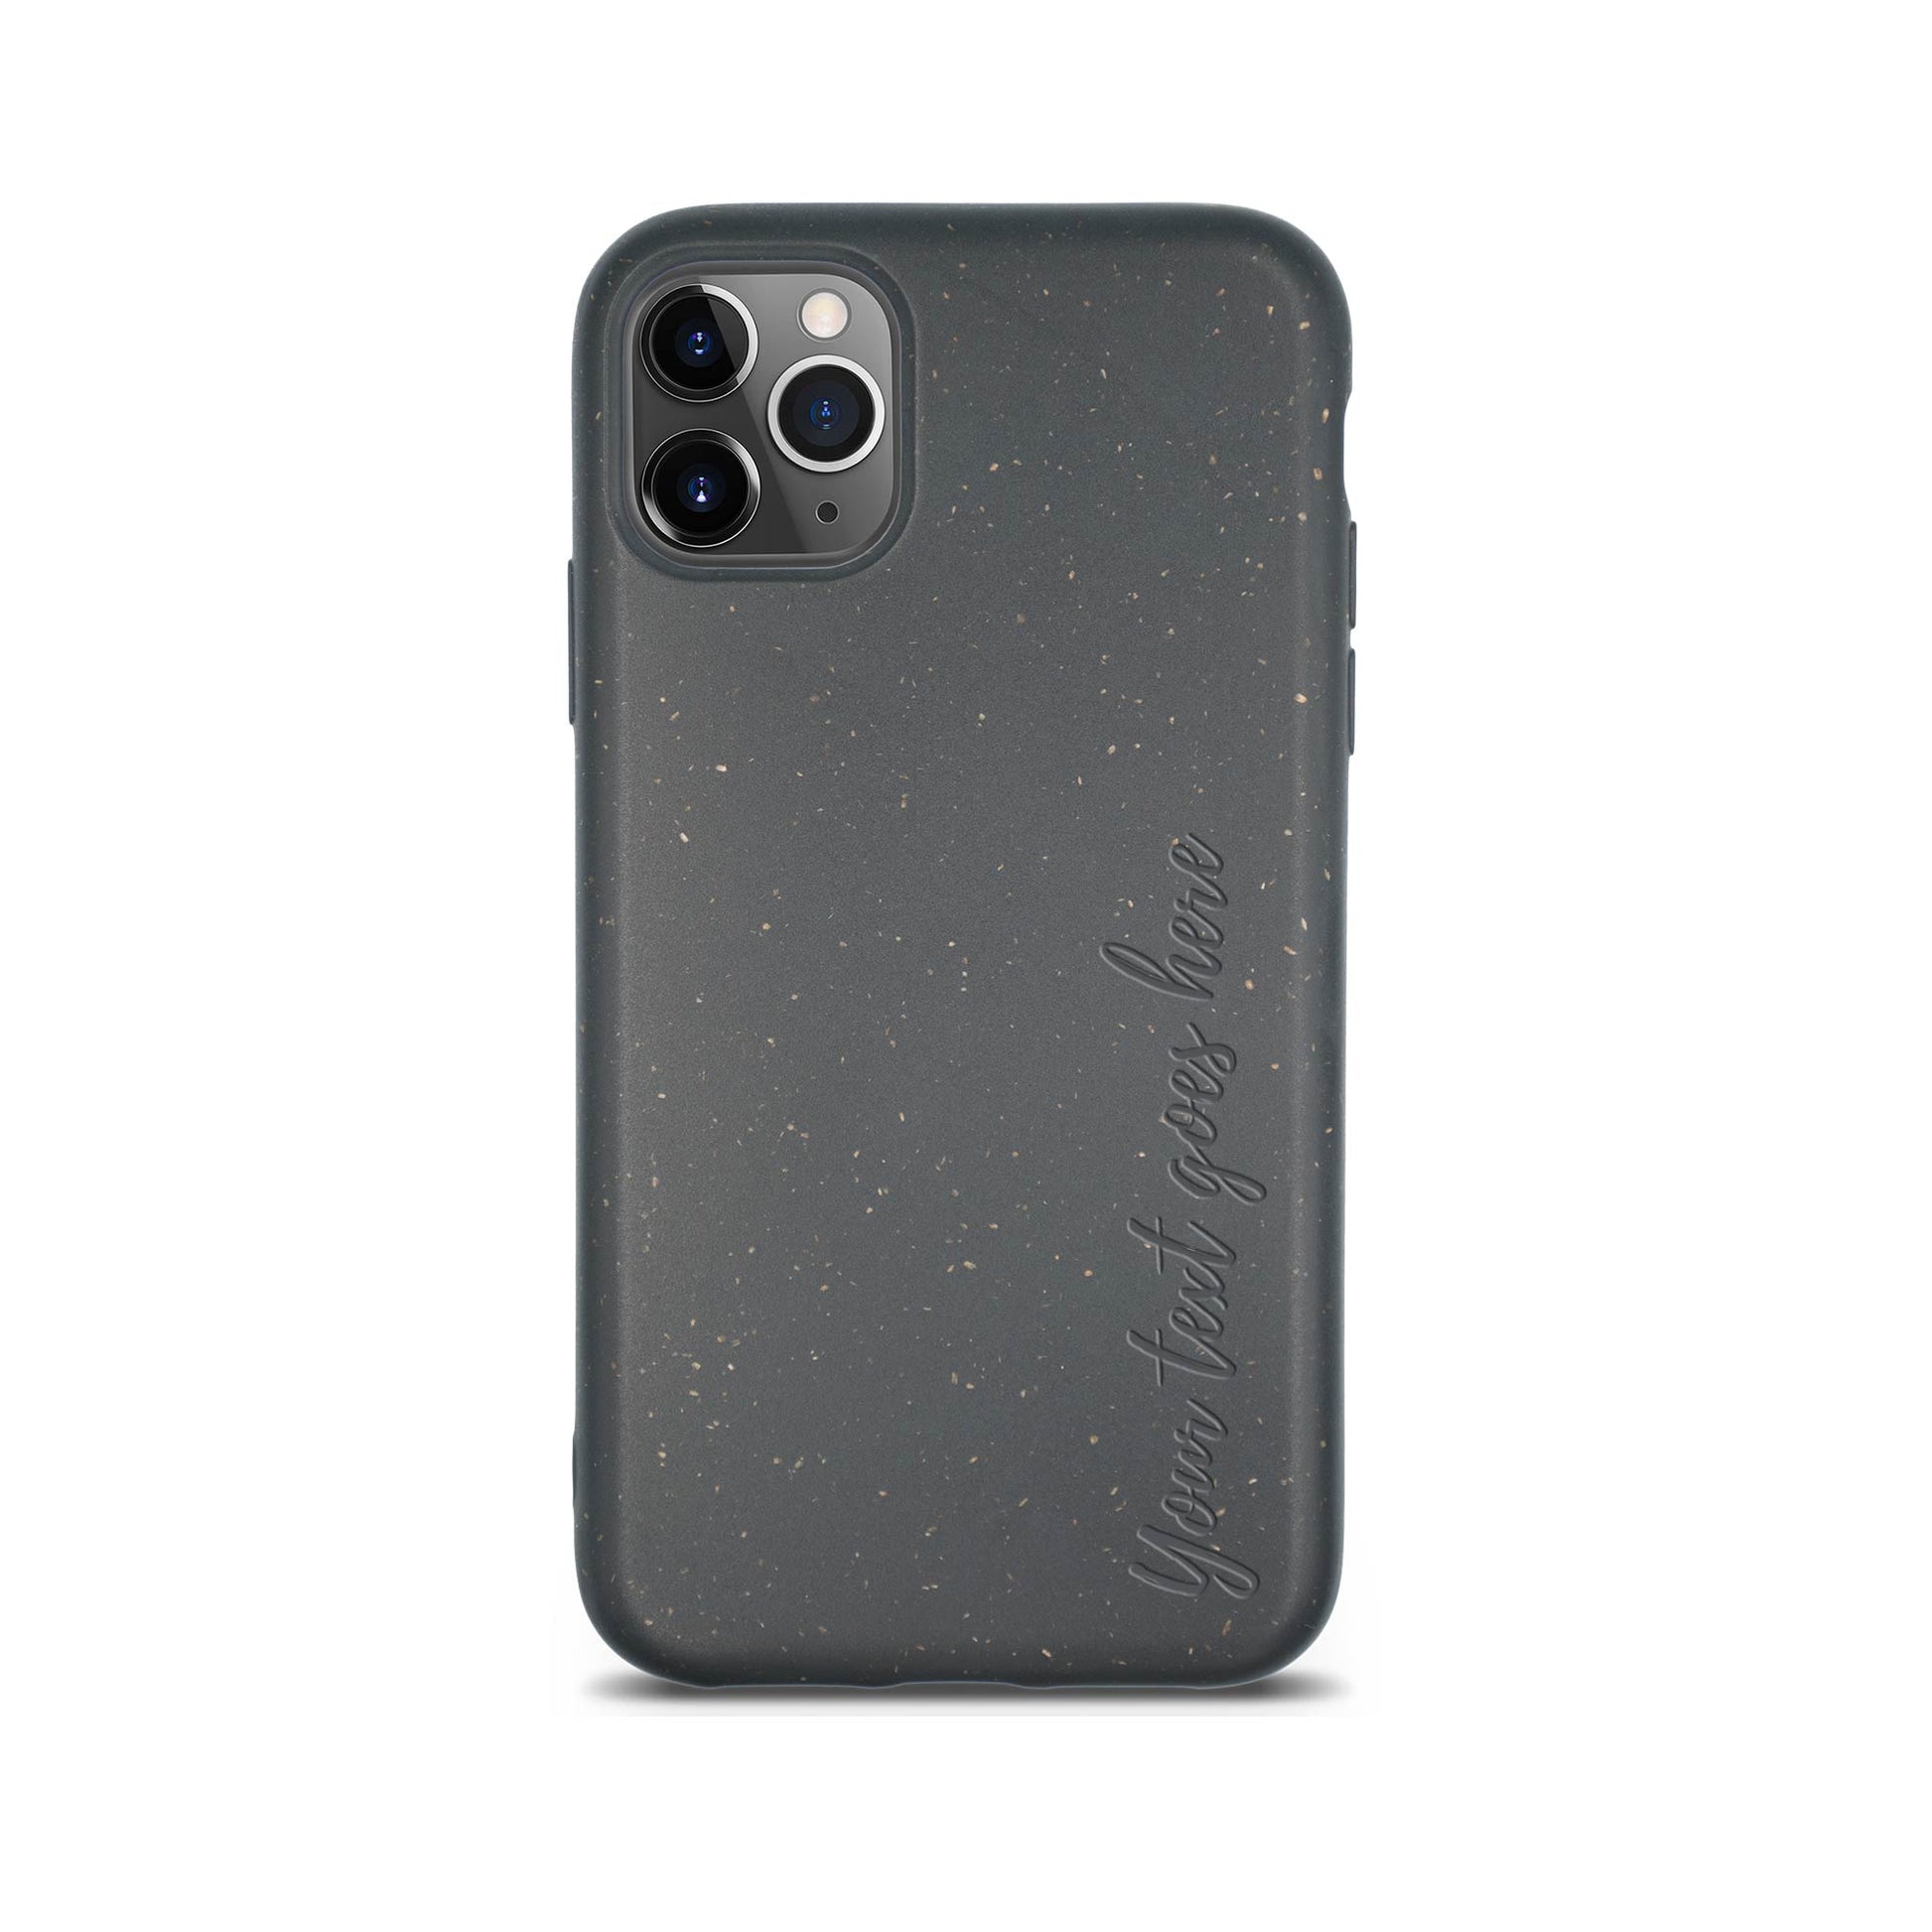 Eco-friendly Biodegradable Personalized iPhone Case in Black by Tan Lily with text "you've got this" on a plain white background, showing camera cutouts for three lenses.